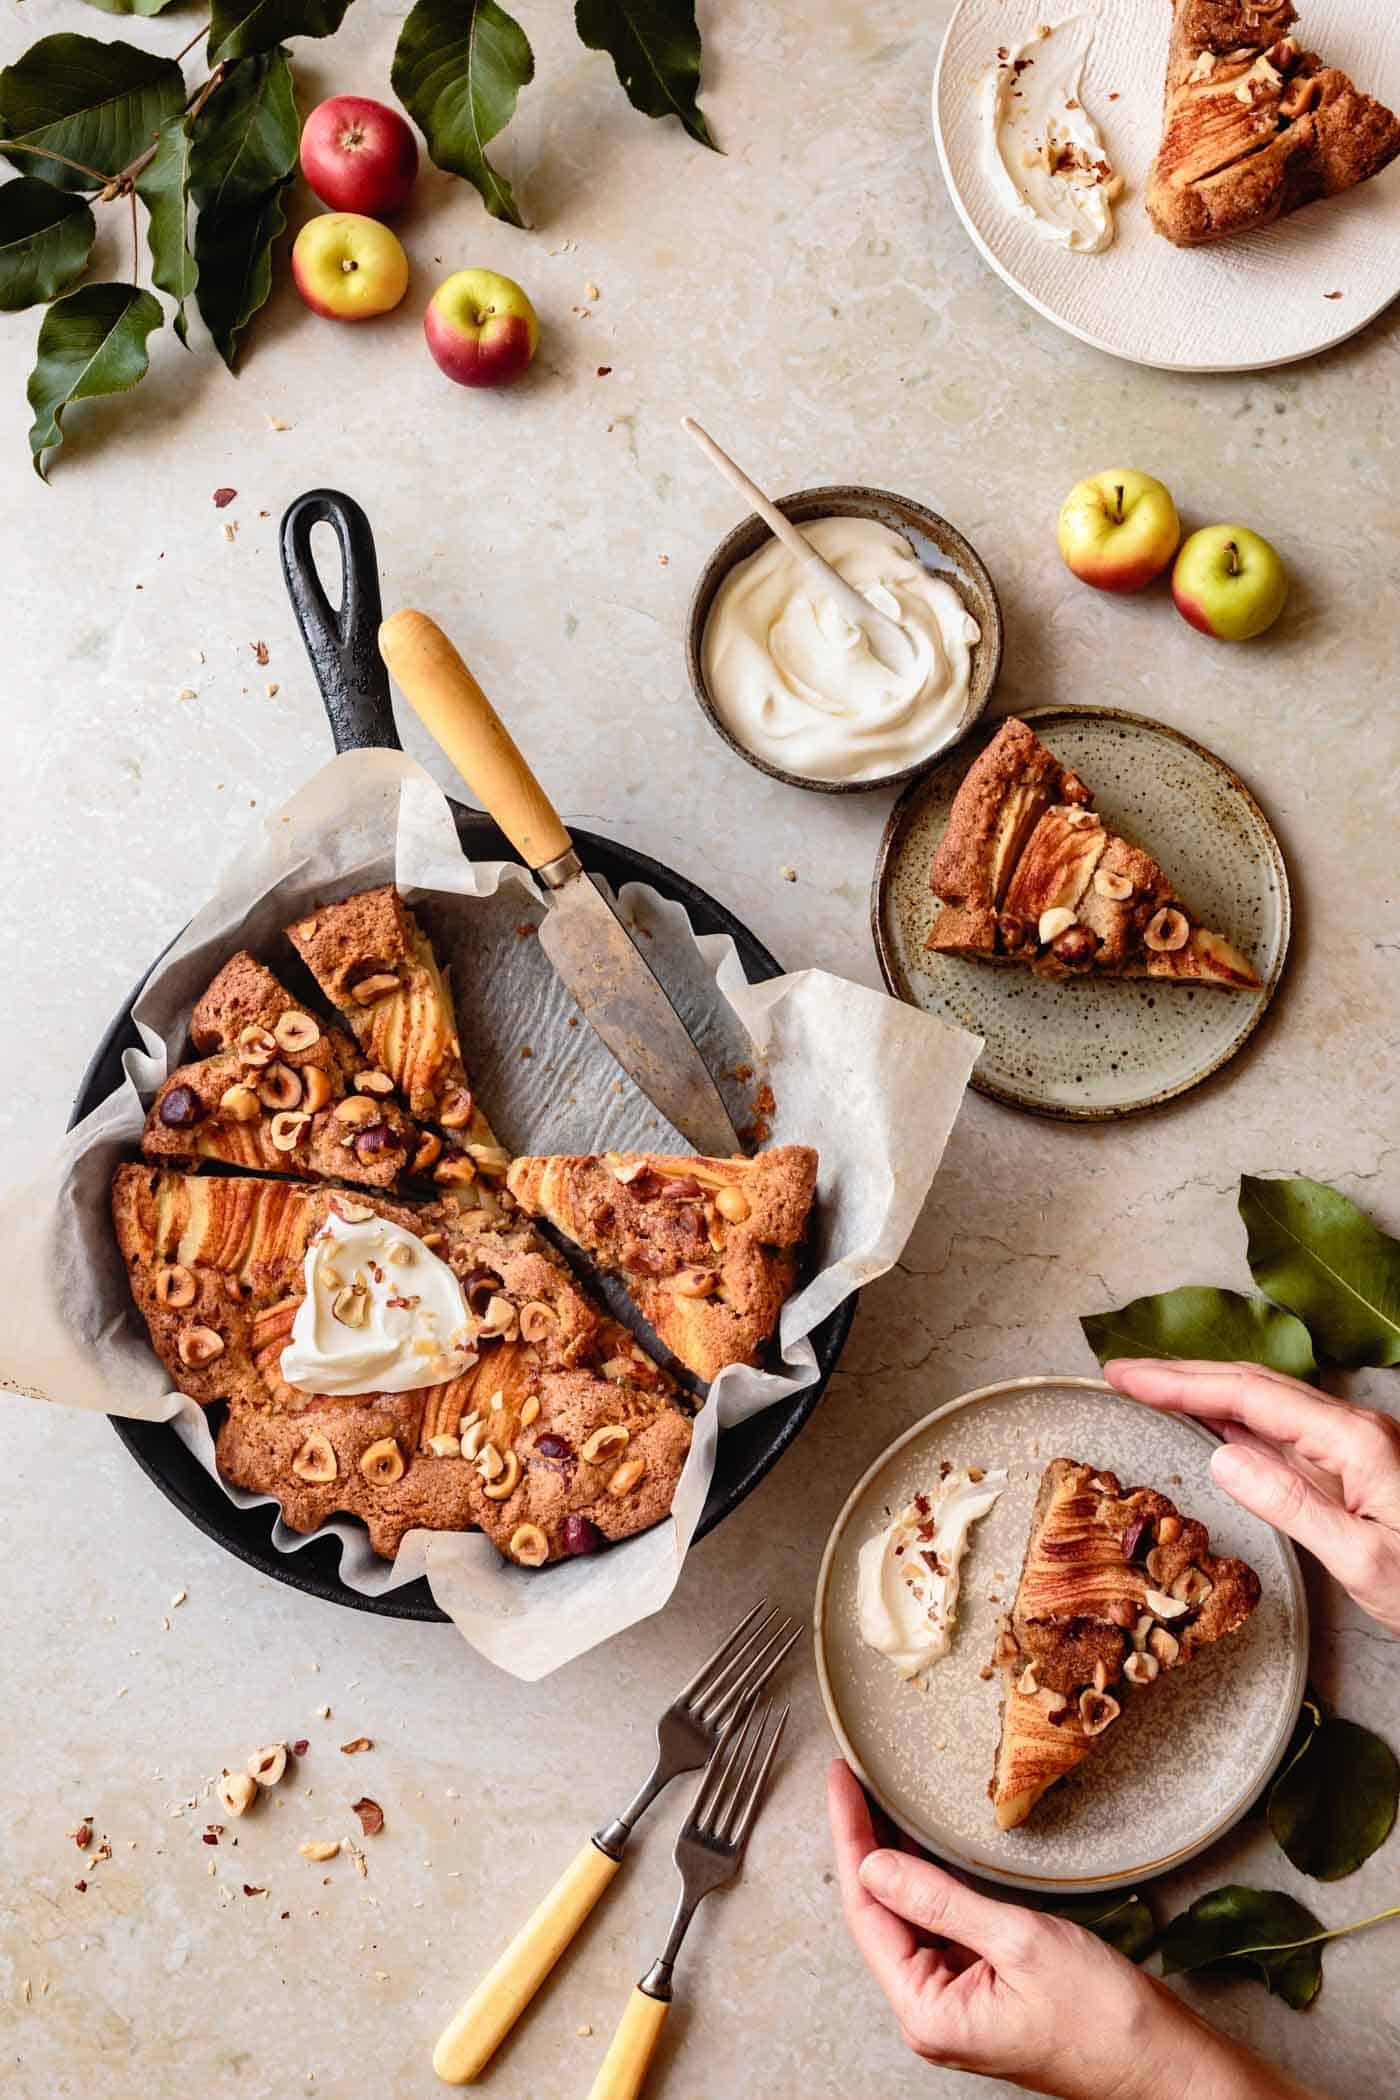 Serving slices of easy gluten-free apple cake with hazelnuts and creme fraiche